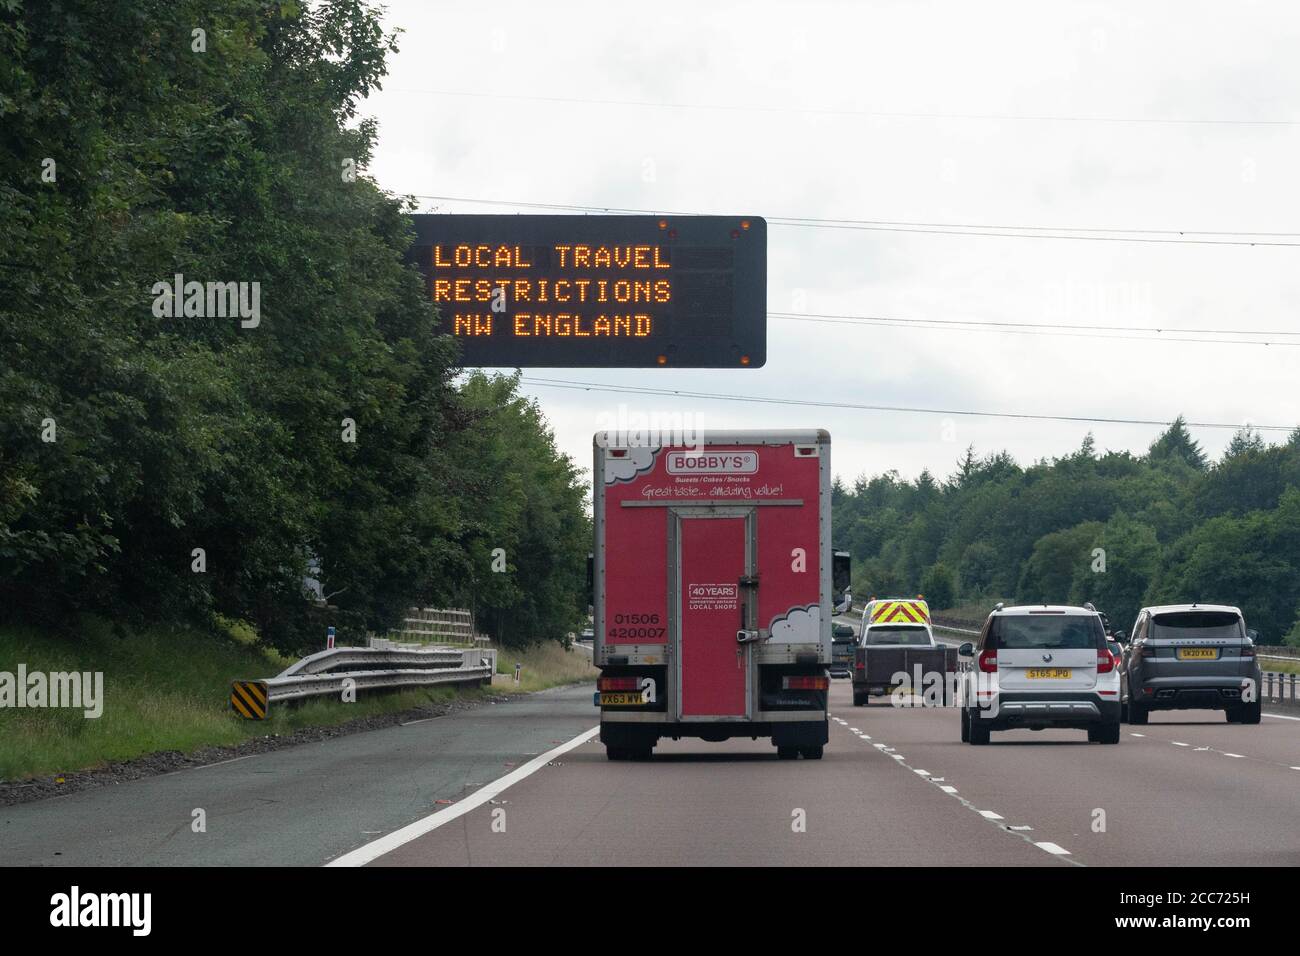 Local Travel Restrictions in NW England M74 motorway sign driving south  from Scotland during covid-19 pandemic Stock Photo